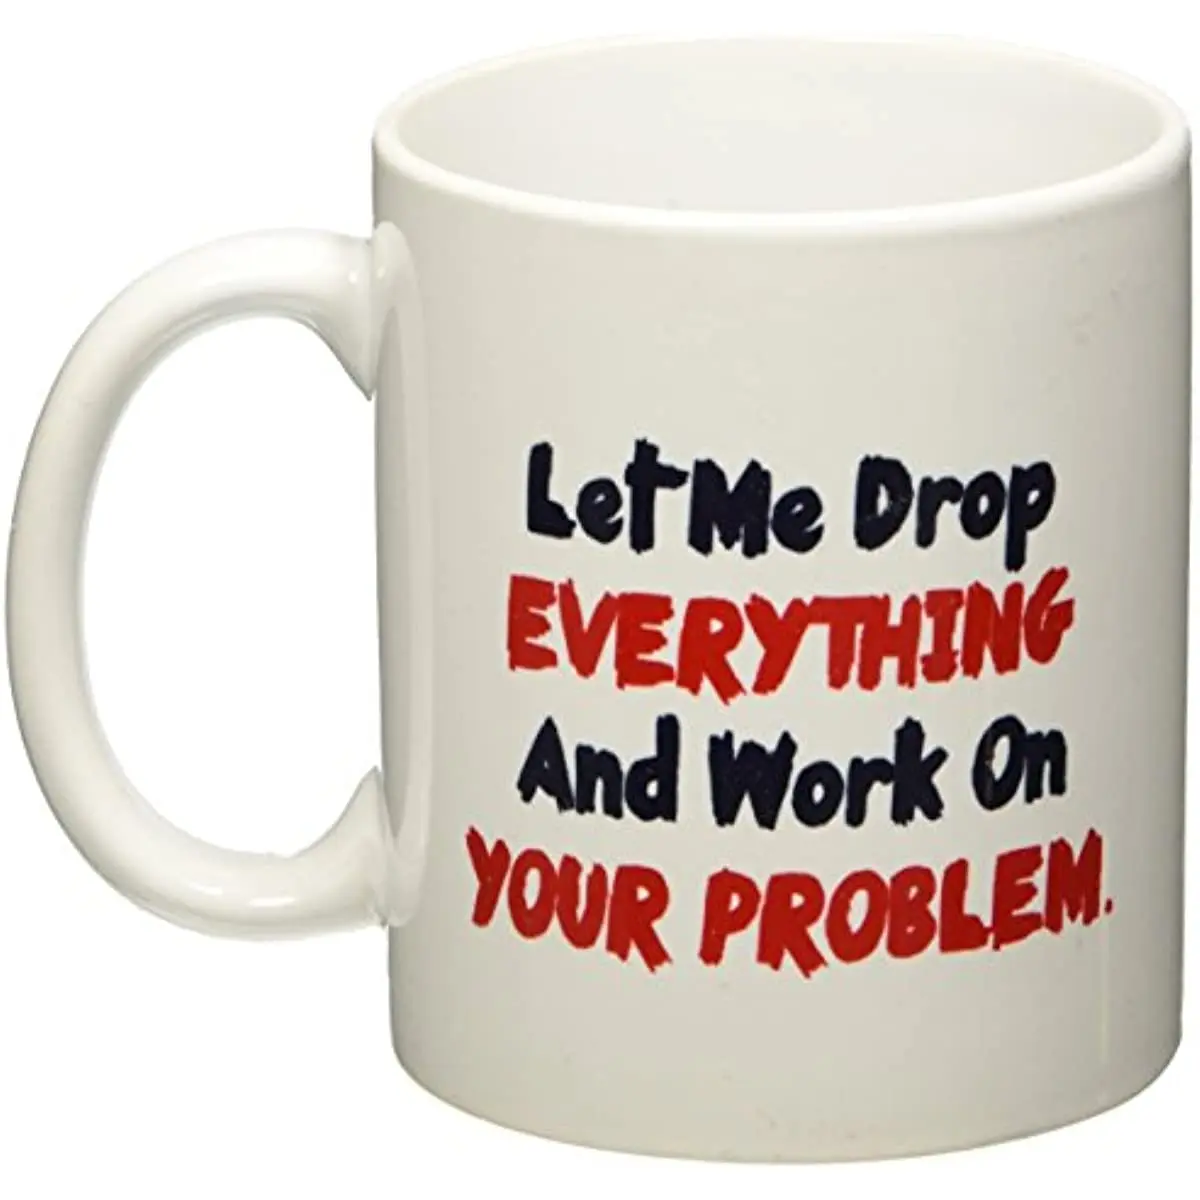 

Let Me Drop Everything And Start Working On Your Problem - 11 OZ Coffee Mug - Funny Inspirational And Sarcasm - By TM